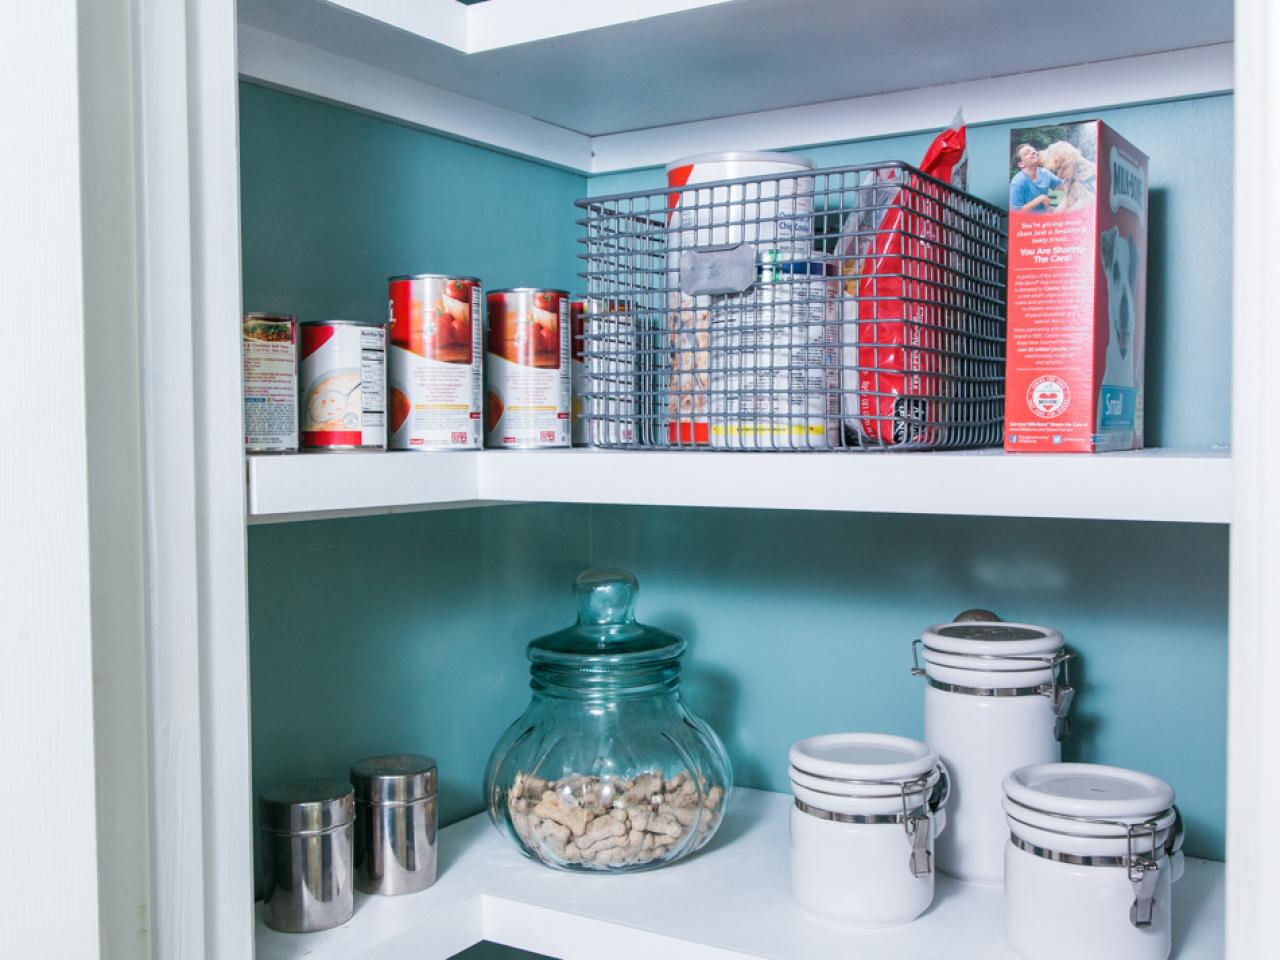 How To Replace Pantry Wire Shelving, How To Install Wire Pantry Shelves